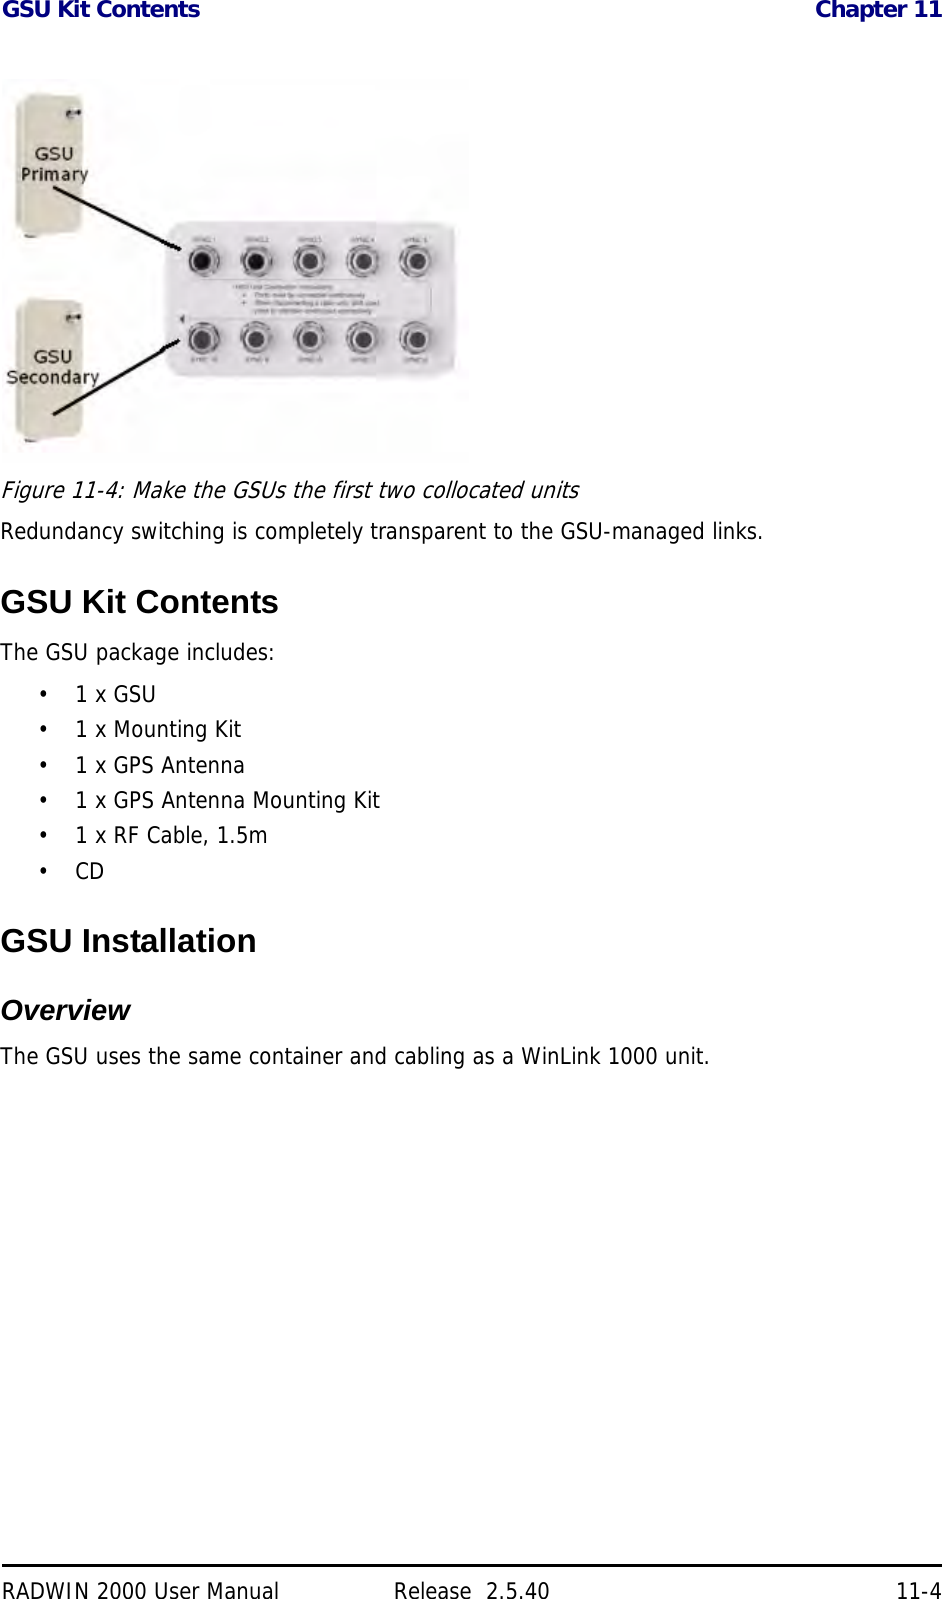 GSU Kit Contents Chapter 11RADWIN 2000 User Manual Release  2.5.40 11-4Figure 11-4: Make the GSUs the first two collocated unitsRedundancy switching is completely transparent to the GSU-managed links.GSU Kit ContentsThe GSU package includes:•1 x GSU• 1 x Mounting Kit•1 x GPS Antenna• 1 x GPS Antenna Mounting Kit• 1 x RF Cable, 1.5m•CDGSU InstallationOverviewThe GSU uses the same container and cabling as a WinLink 1000 unit.